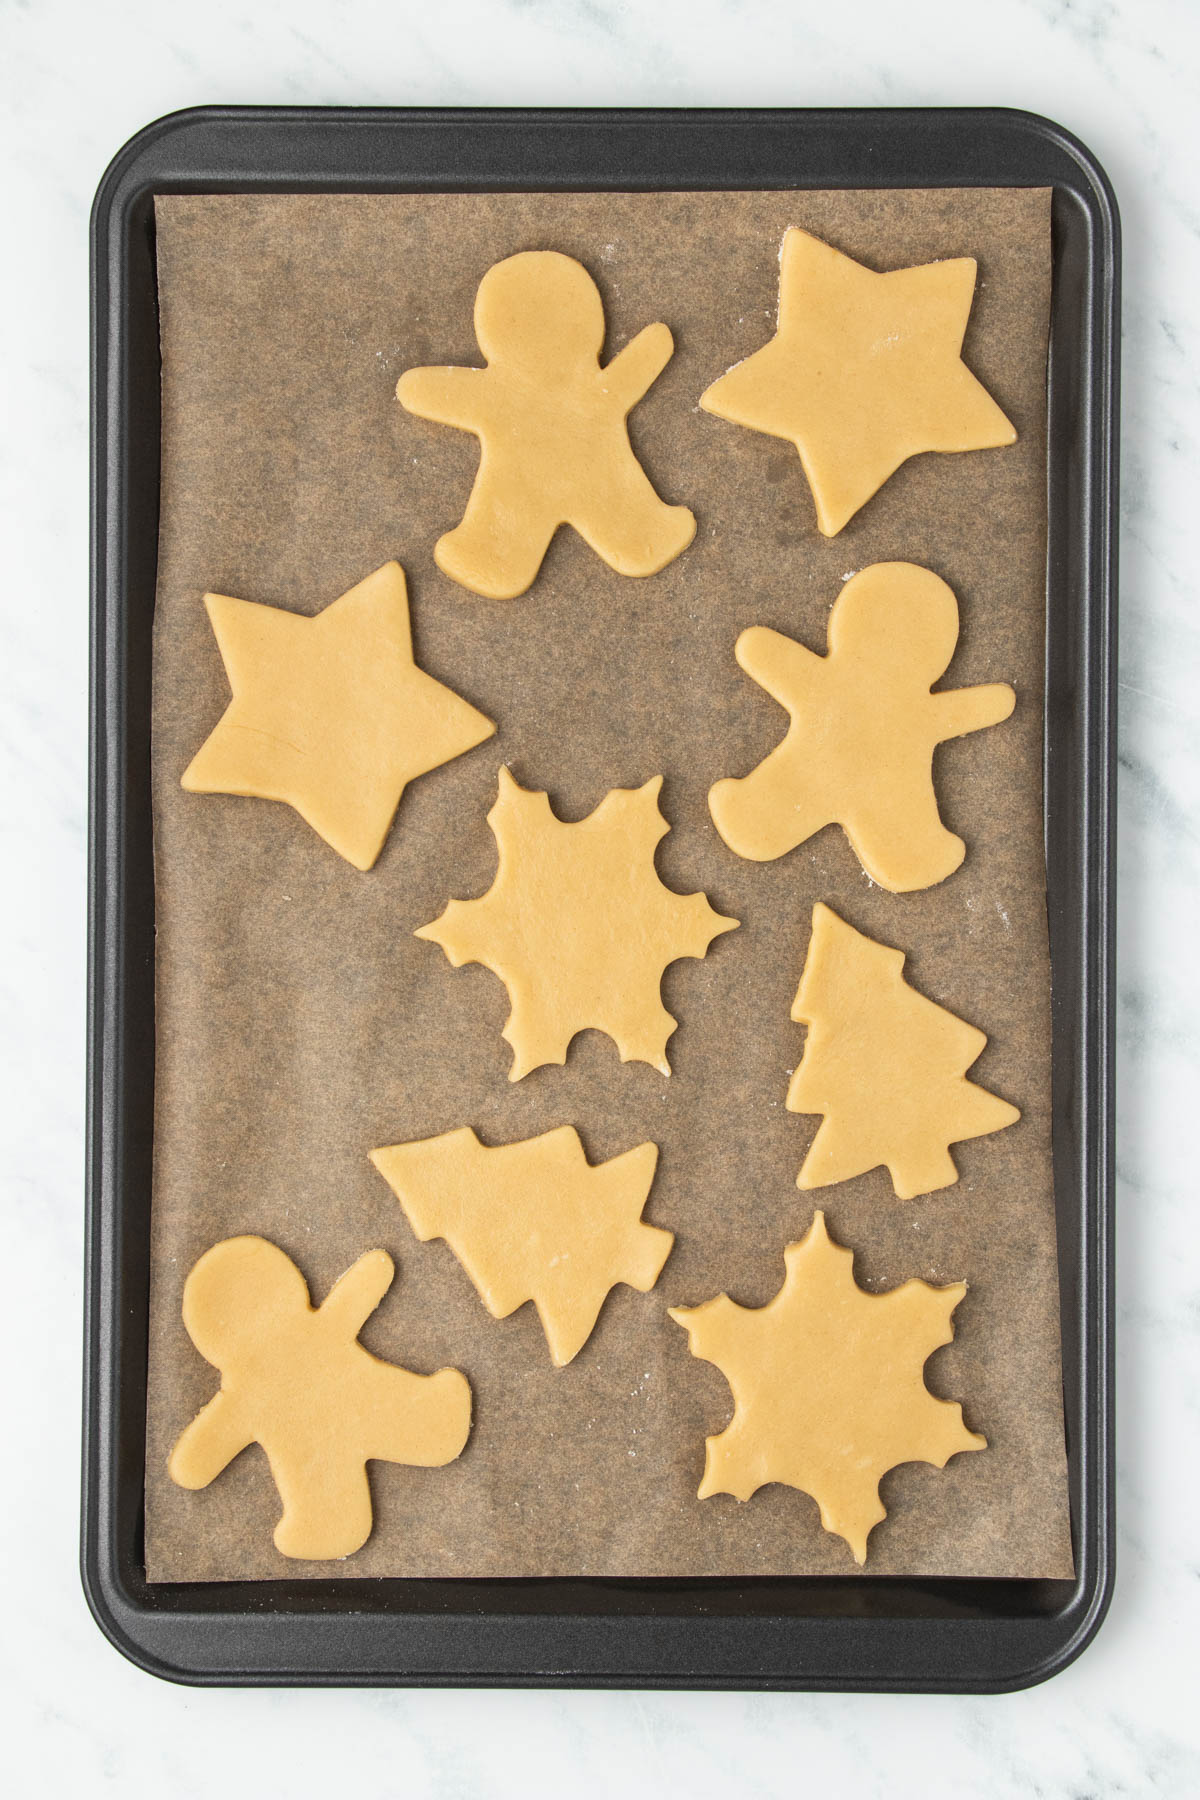 Gingerbread cookies on a baking sheet.